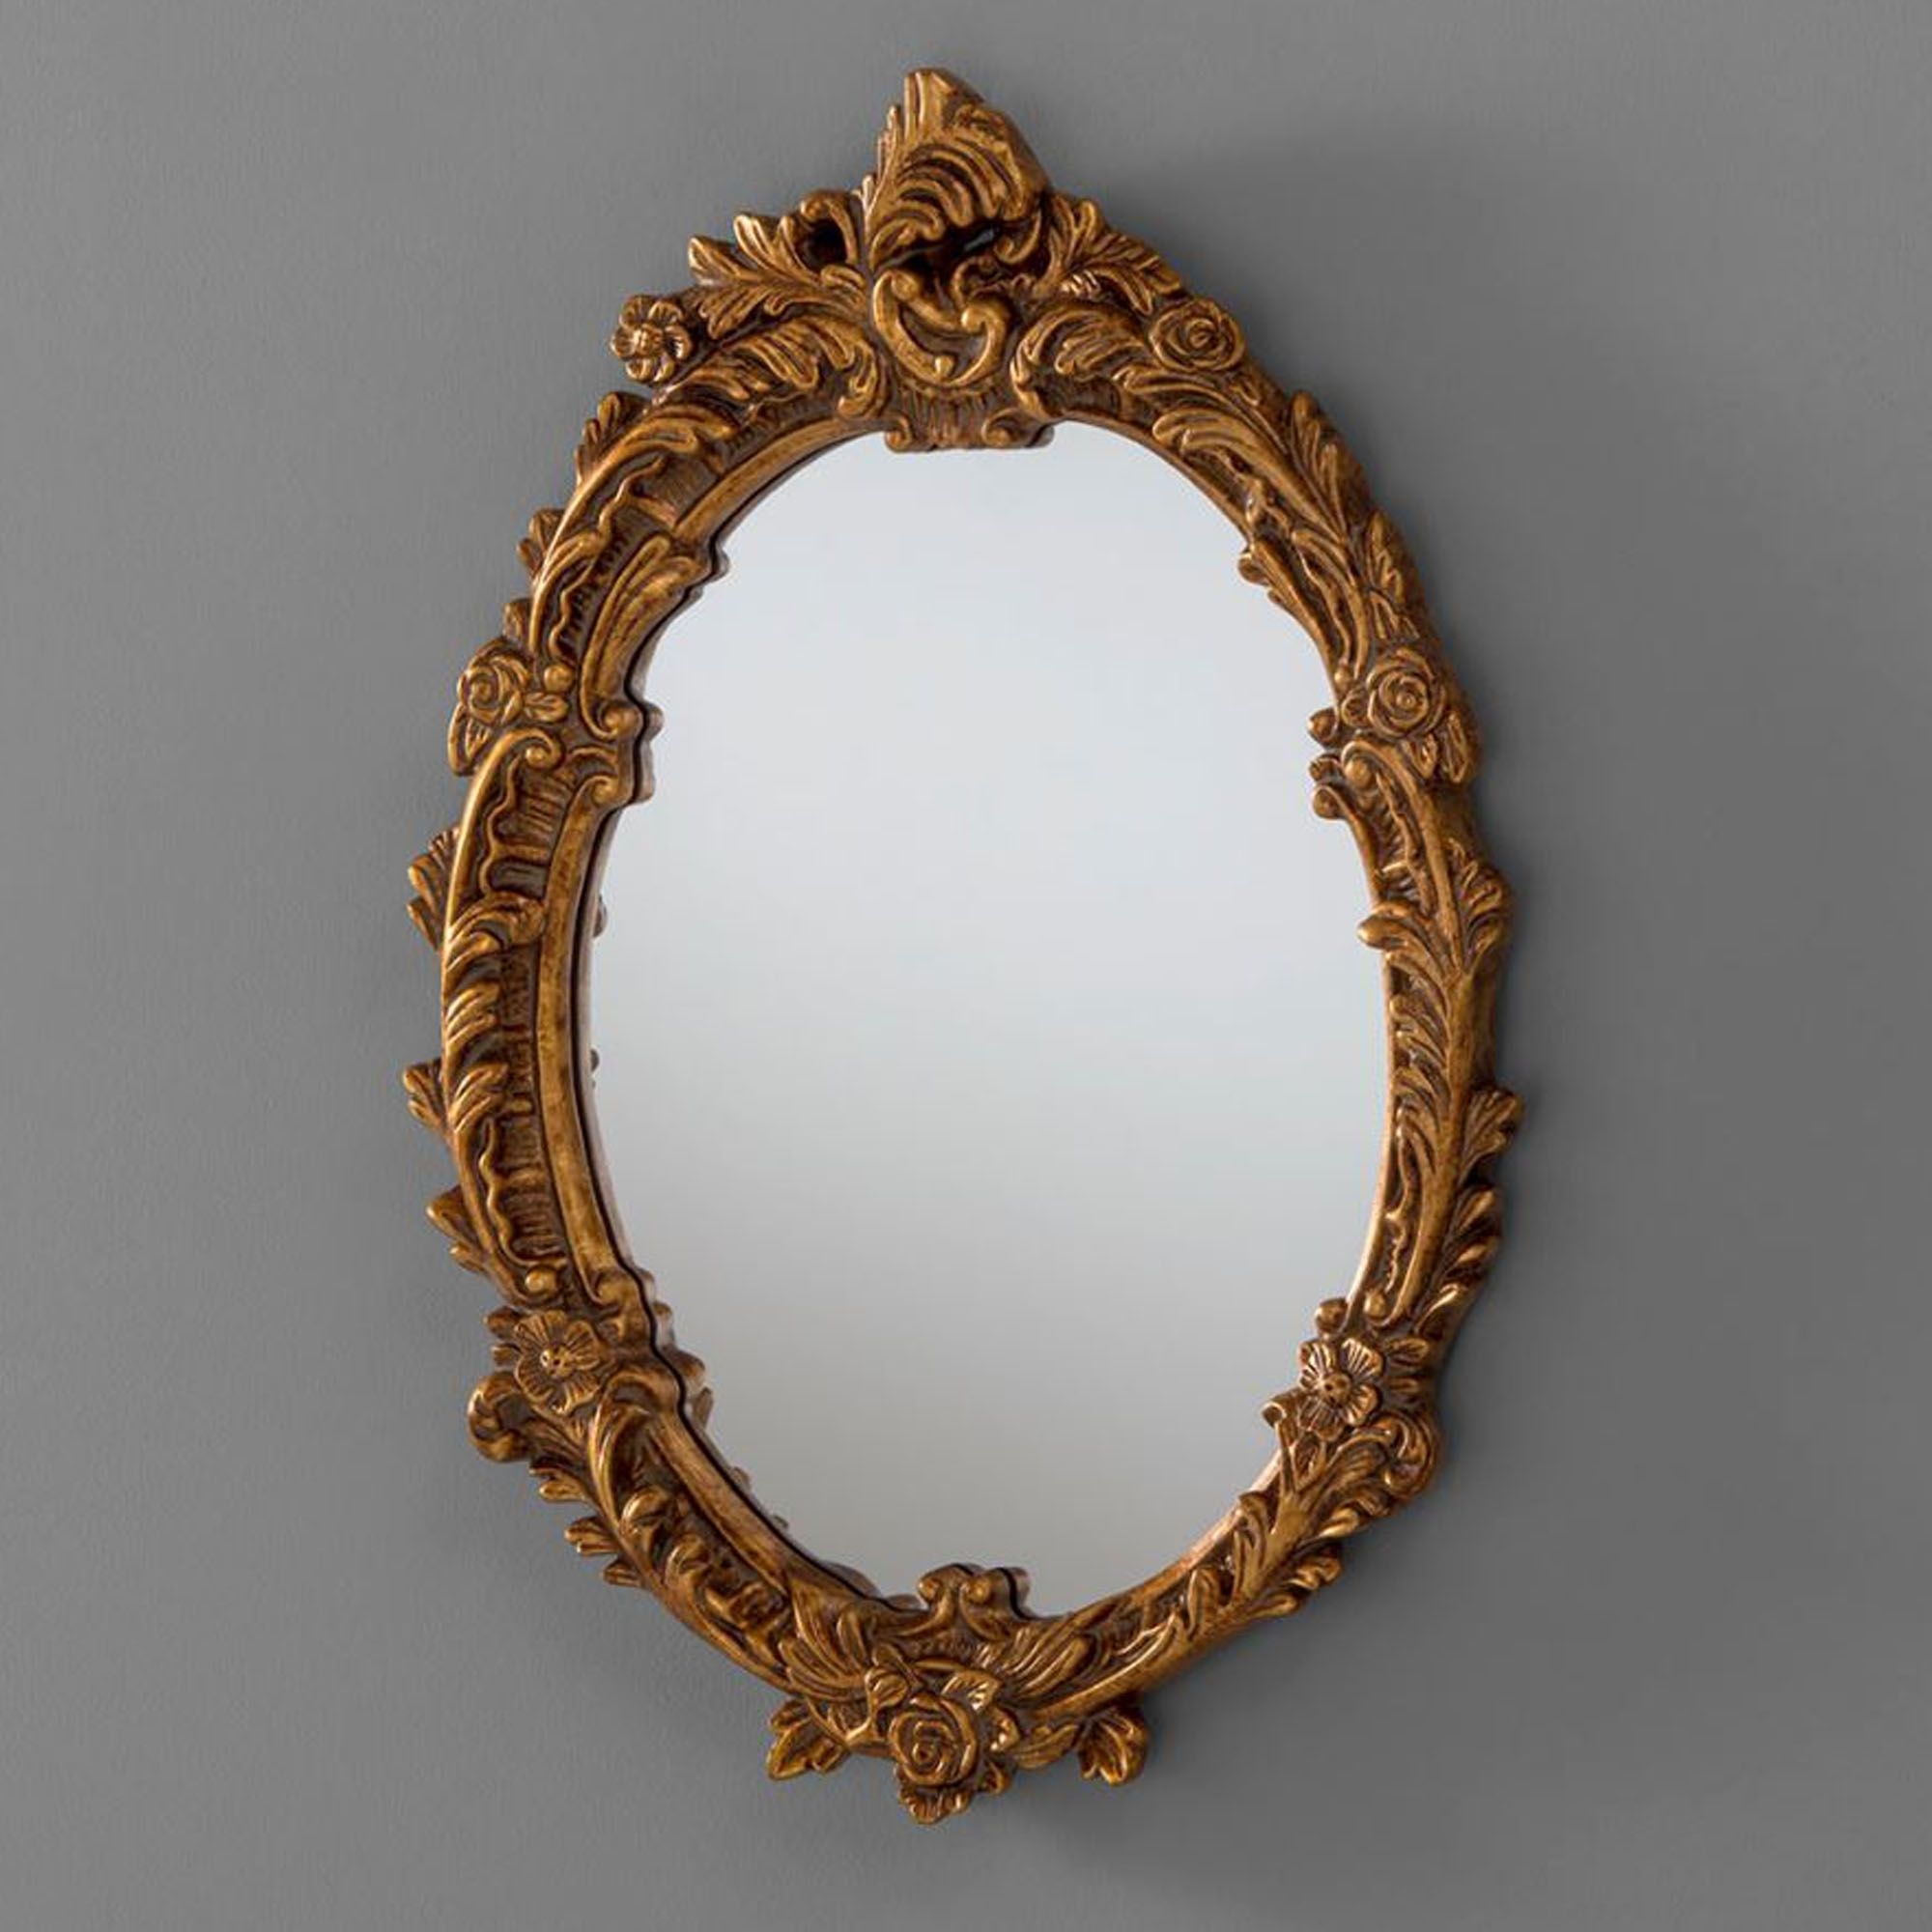 Antique French Style Oval Gold Ornate Wall Mirror | Homesdirect365 With Oval Metallic Accent Mirrors (View 11 of 15)